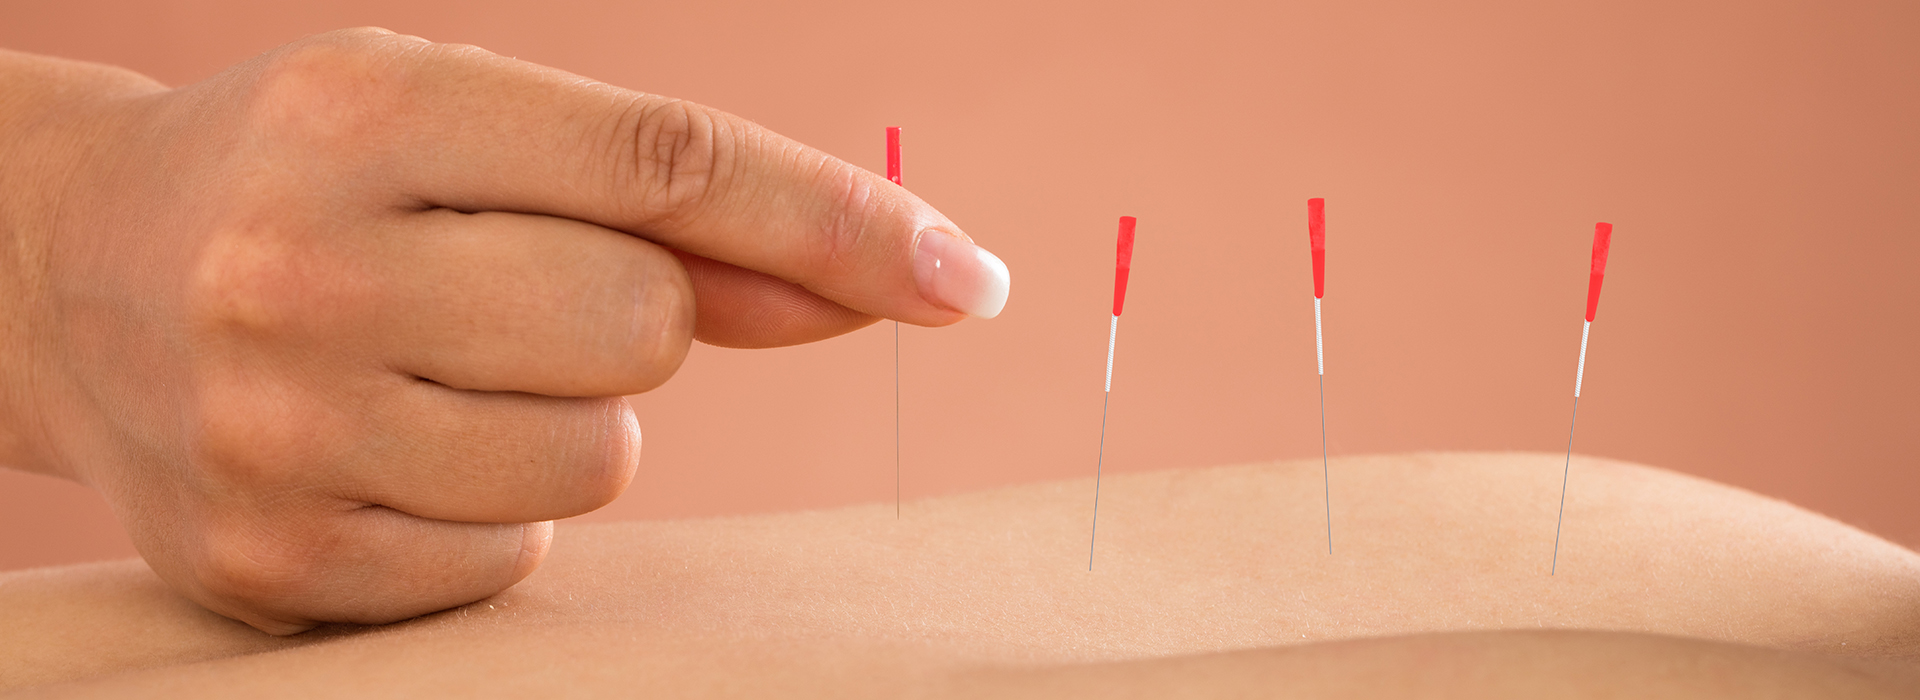 Acupuncture Cheap Near Me - Acupuncture Acupressure Points